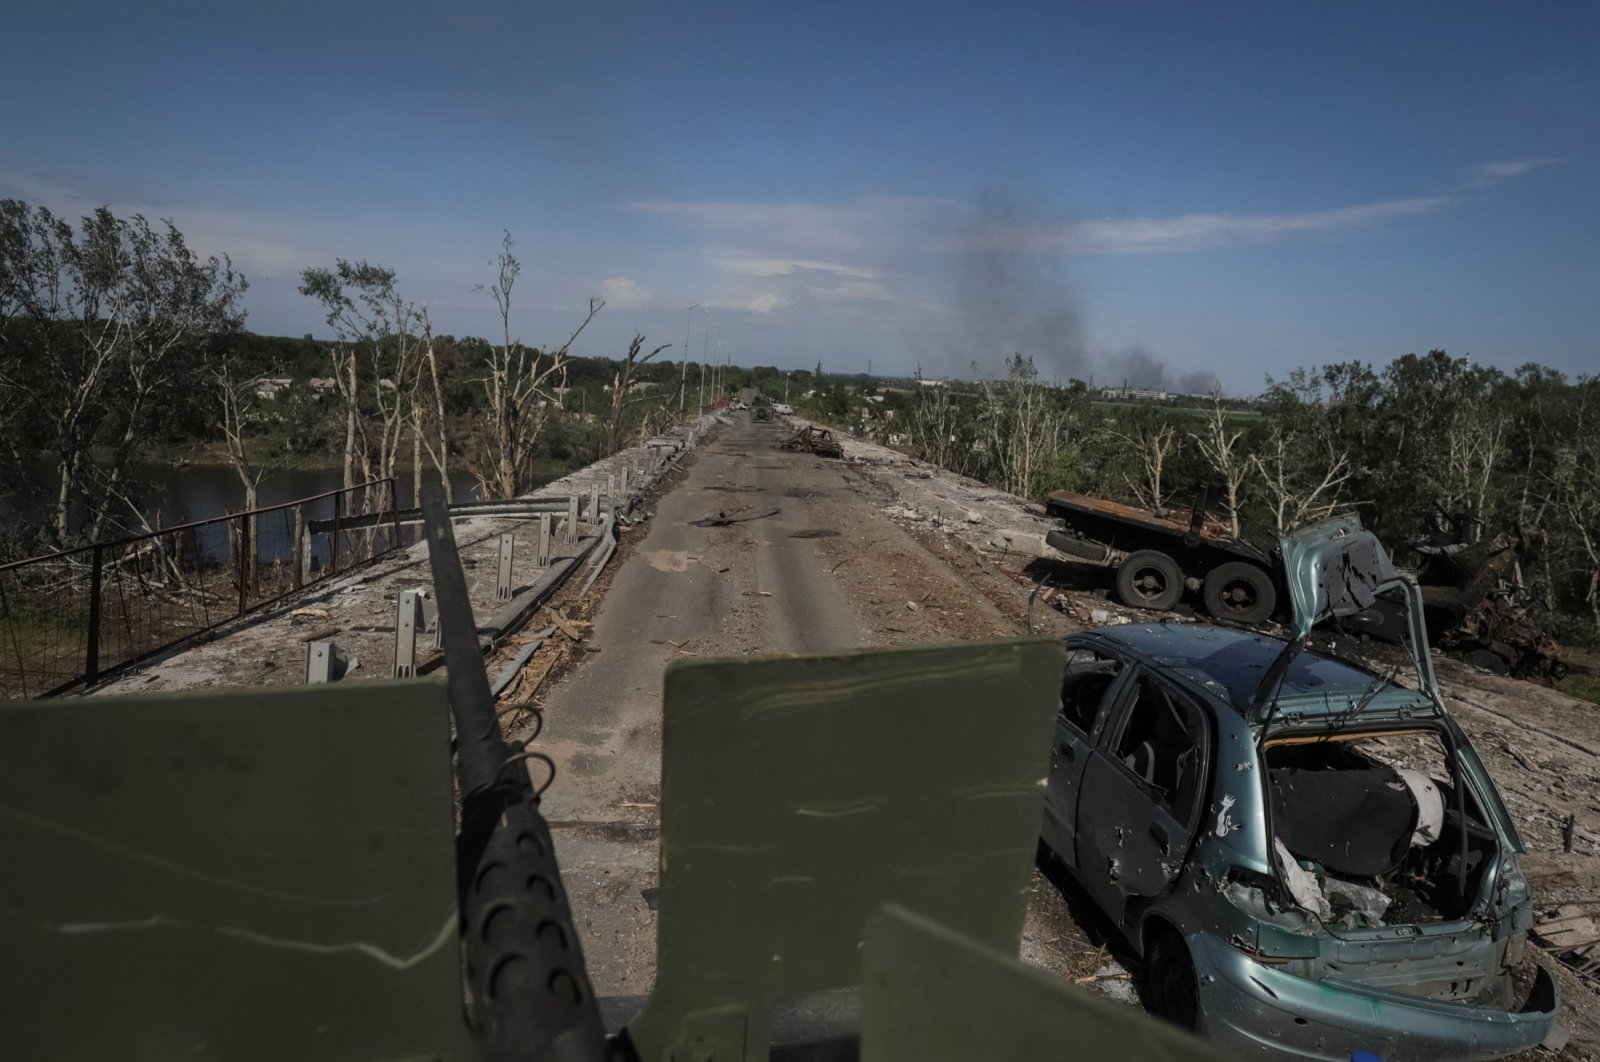 Members of a foreign volunteers unit that fights in the Ukrainian army drive on a military vehicle, as Russia&#039;s attack on Ukraine continues, in Sievierodonetsk, Luhansk region Ukraine, June 2, 2022. (Reuters File Photo)